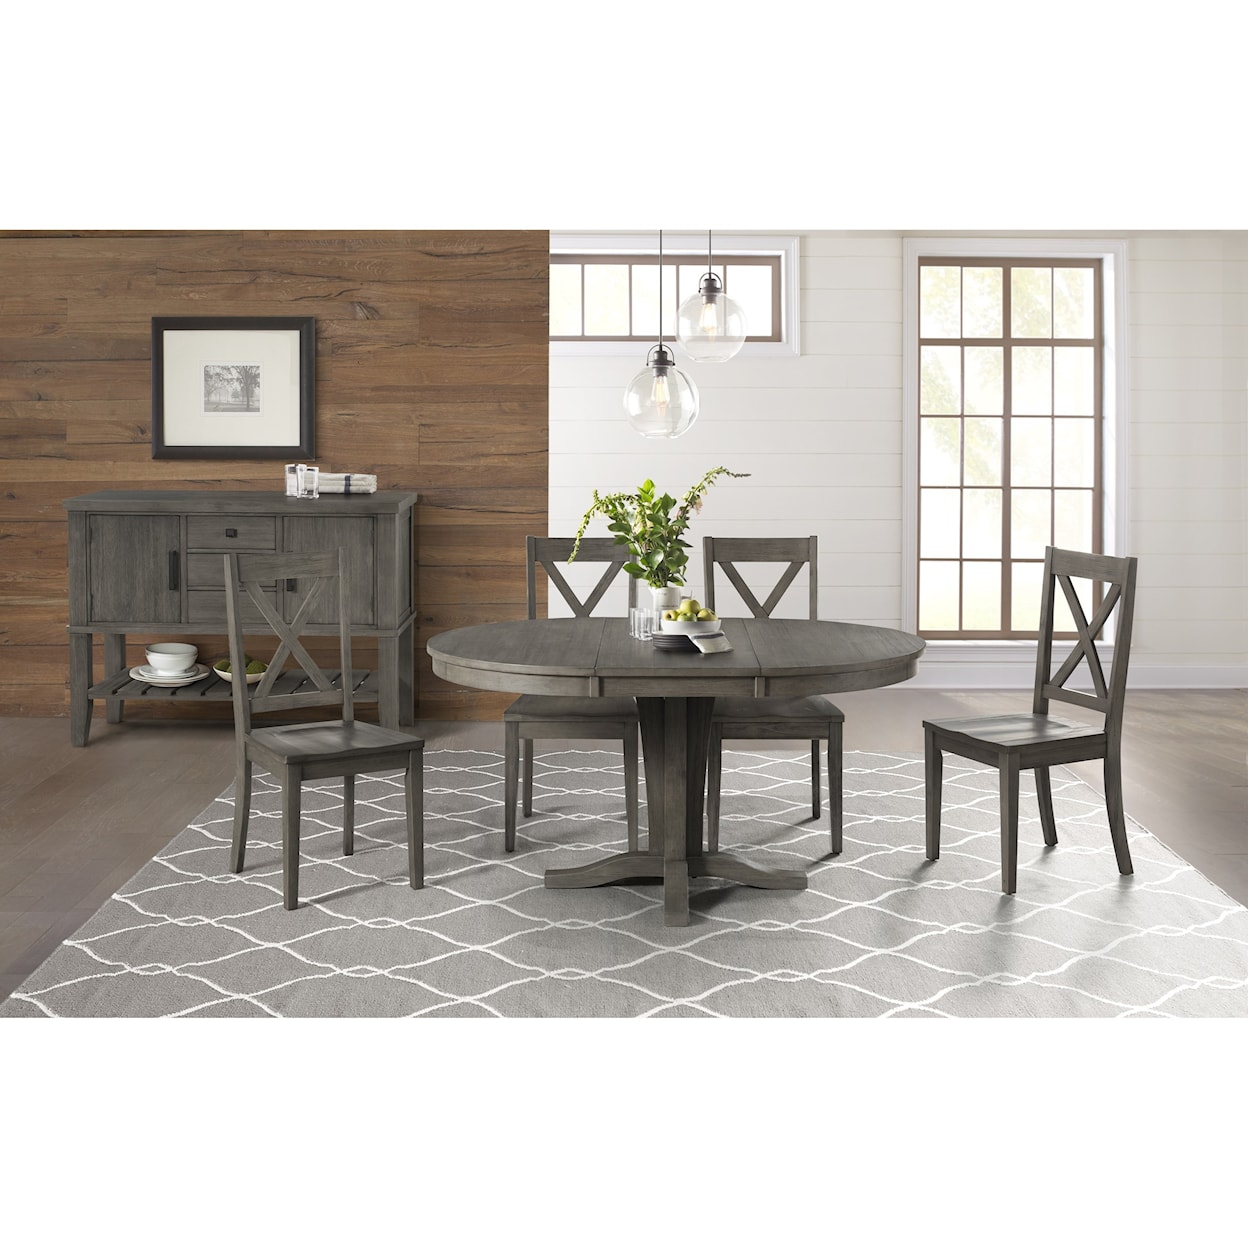 AAmerica Huron Casual Dining Room Group